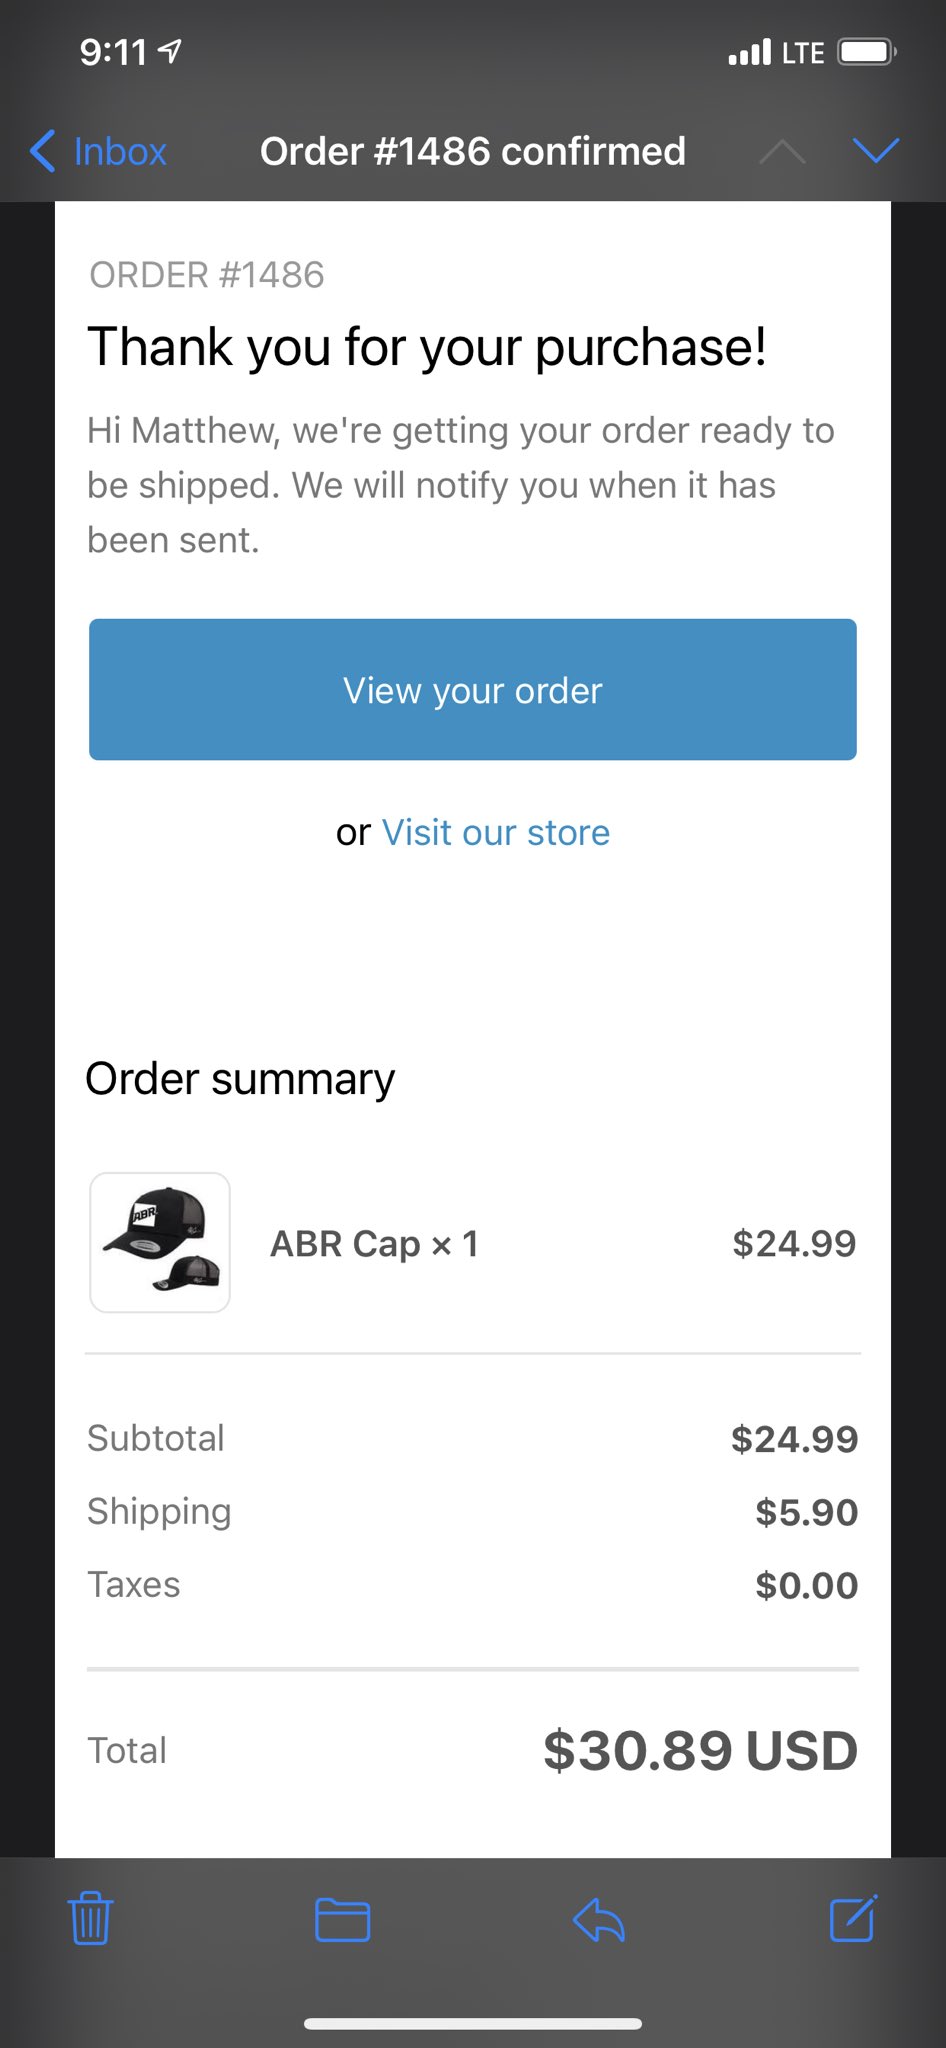  had to snag an ABR hat to celebrate the victory with! Also, Happy early birthday! 